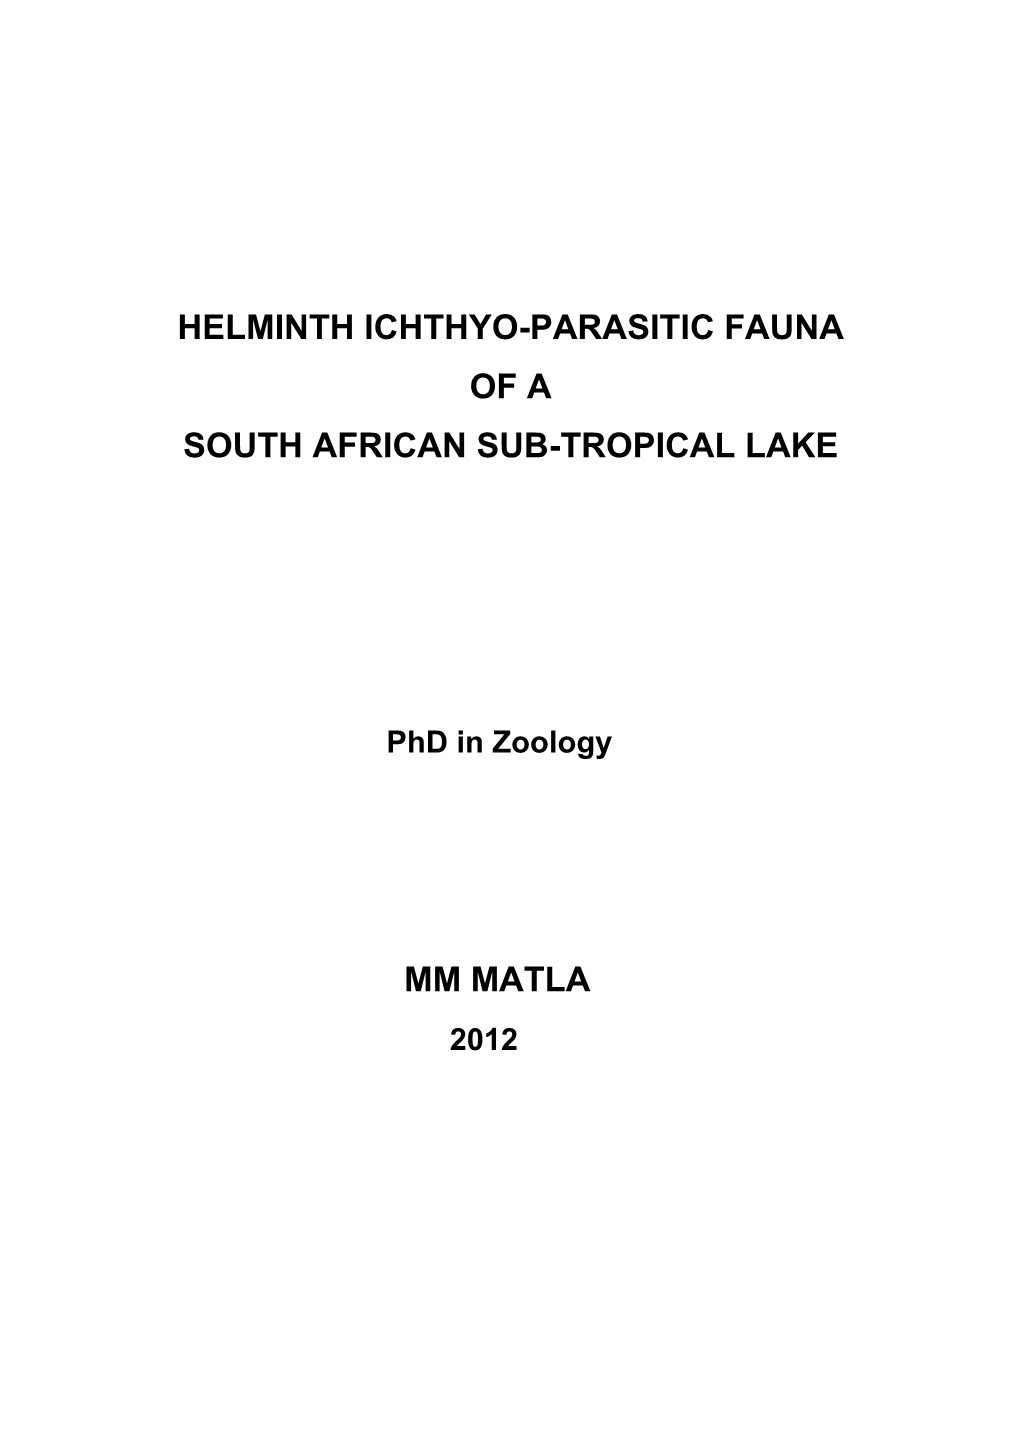 Helminth Ichthyo-Parasitic Fauna of a South African Sub-Tropical Lake